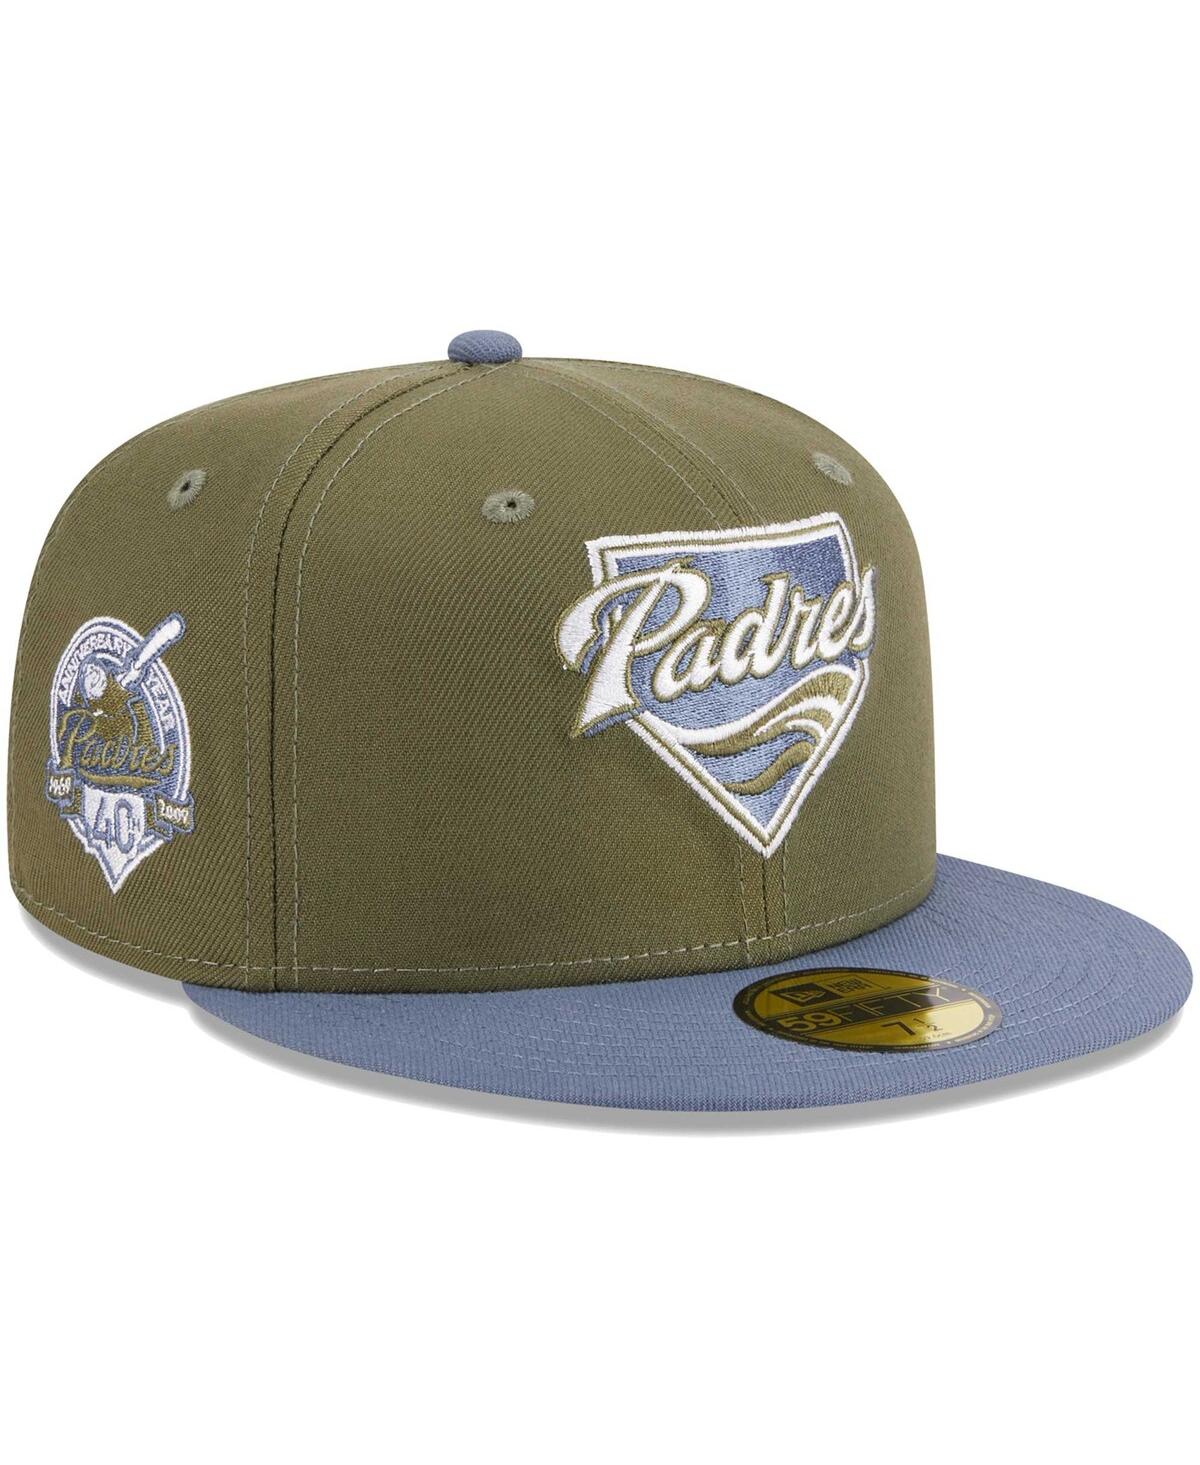 NEW ERA MEN'S NEW ERA OLIVE, BLUE SAN DIEGO PADRES 59FIFTY FITTED HAT